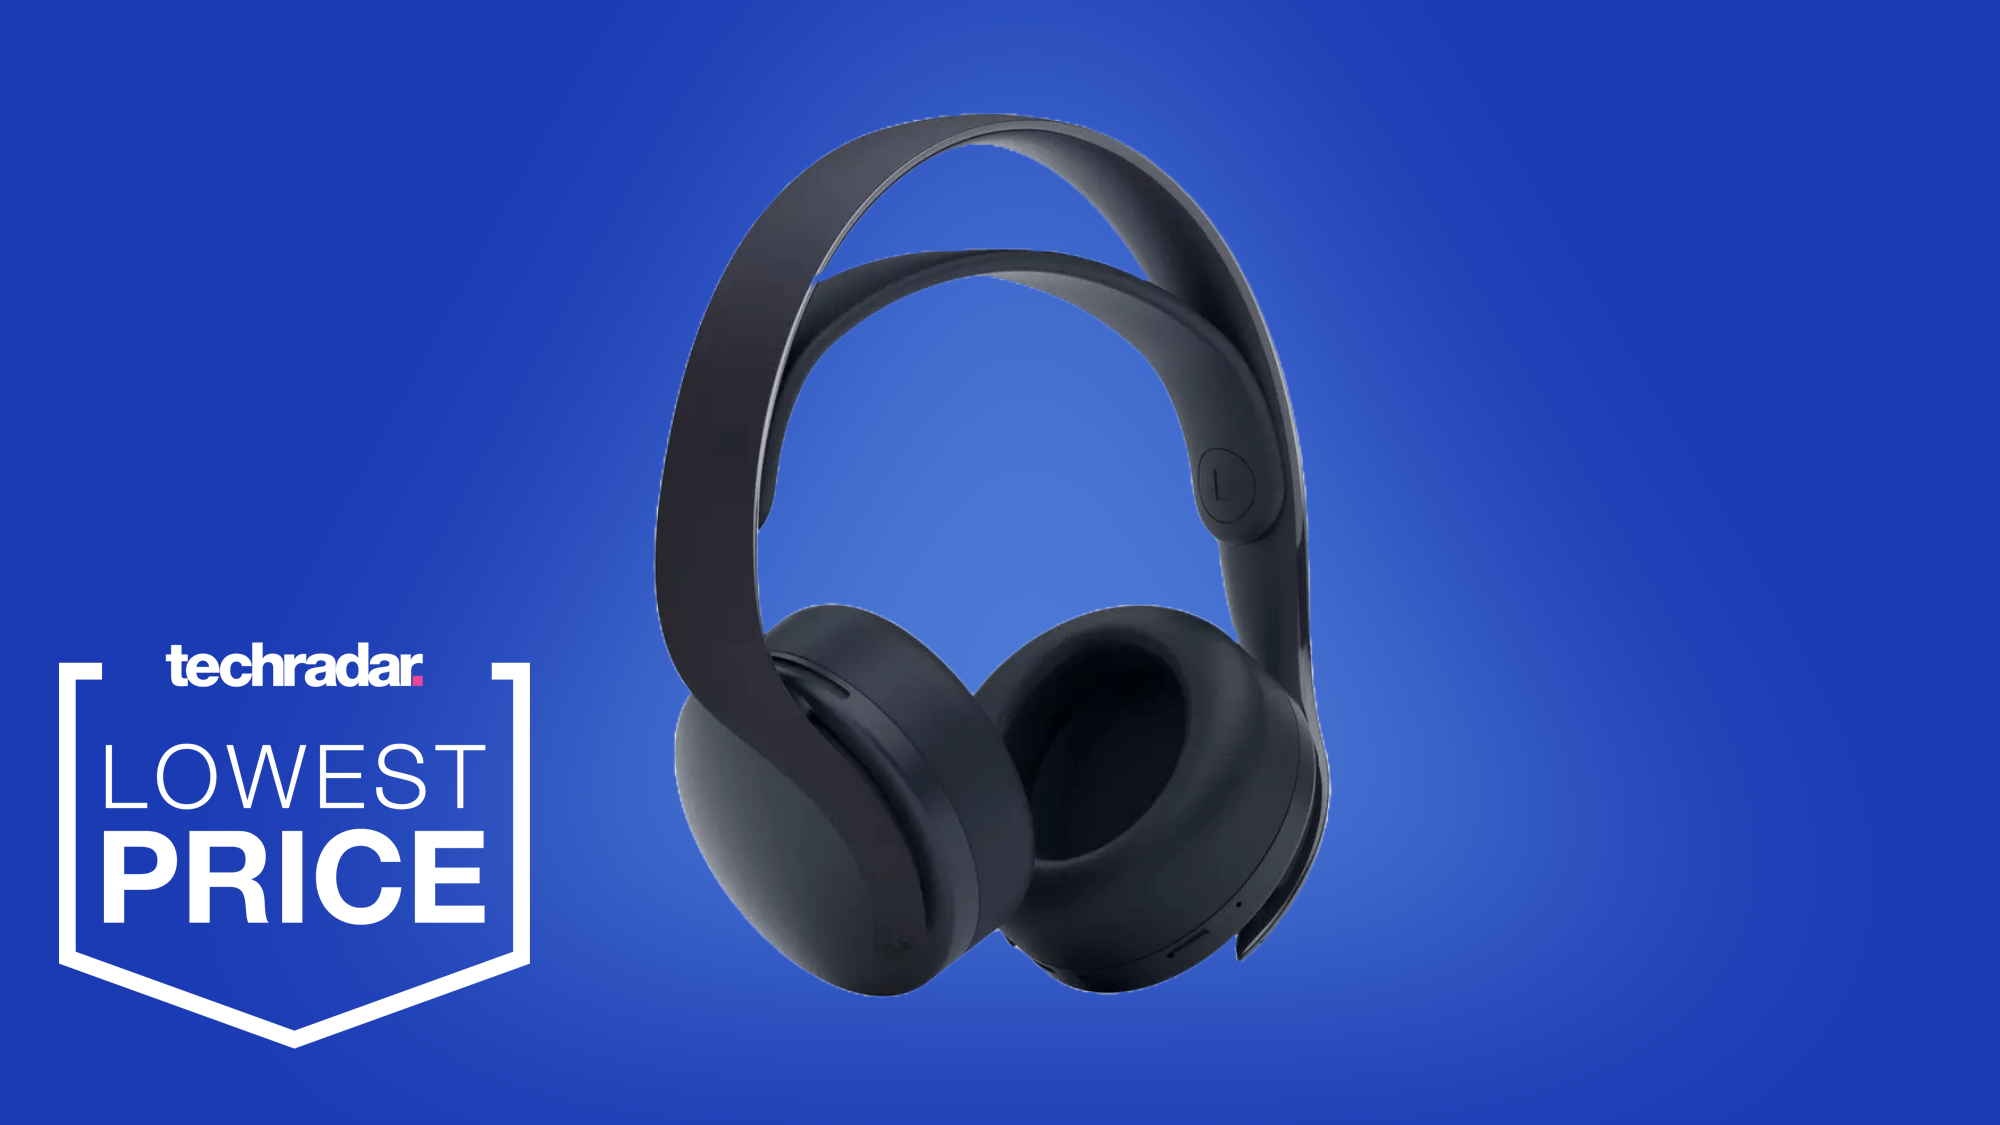 Nice Black Friday Deal Drops Sony Pulse 3D Headset To $69 - GameSpot